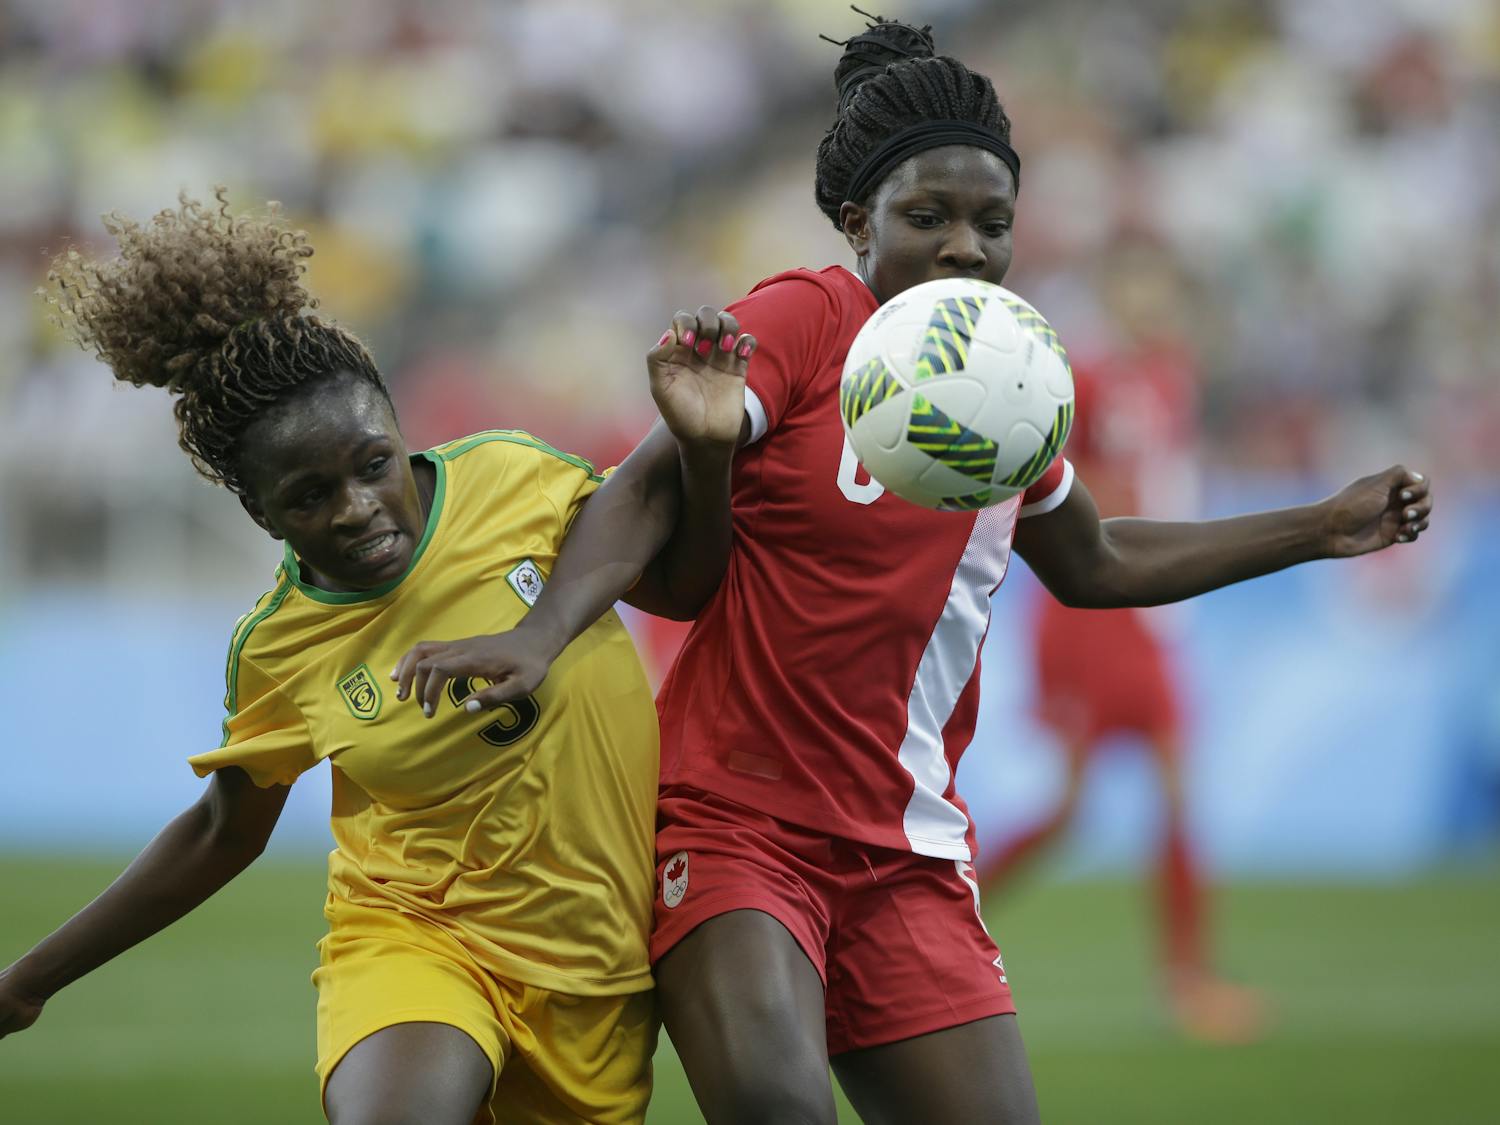 Canada's Deanne Rose, right, and Zimbabwe's Sheila Makoto fight for the ball during a group F match of the women's Olympic football tournament between Canada and Zimbabwe in Sao Paulo, Brazil, Saturday, Aug. 6, 2016. (AP Photo/Nelson Antoine)